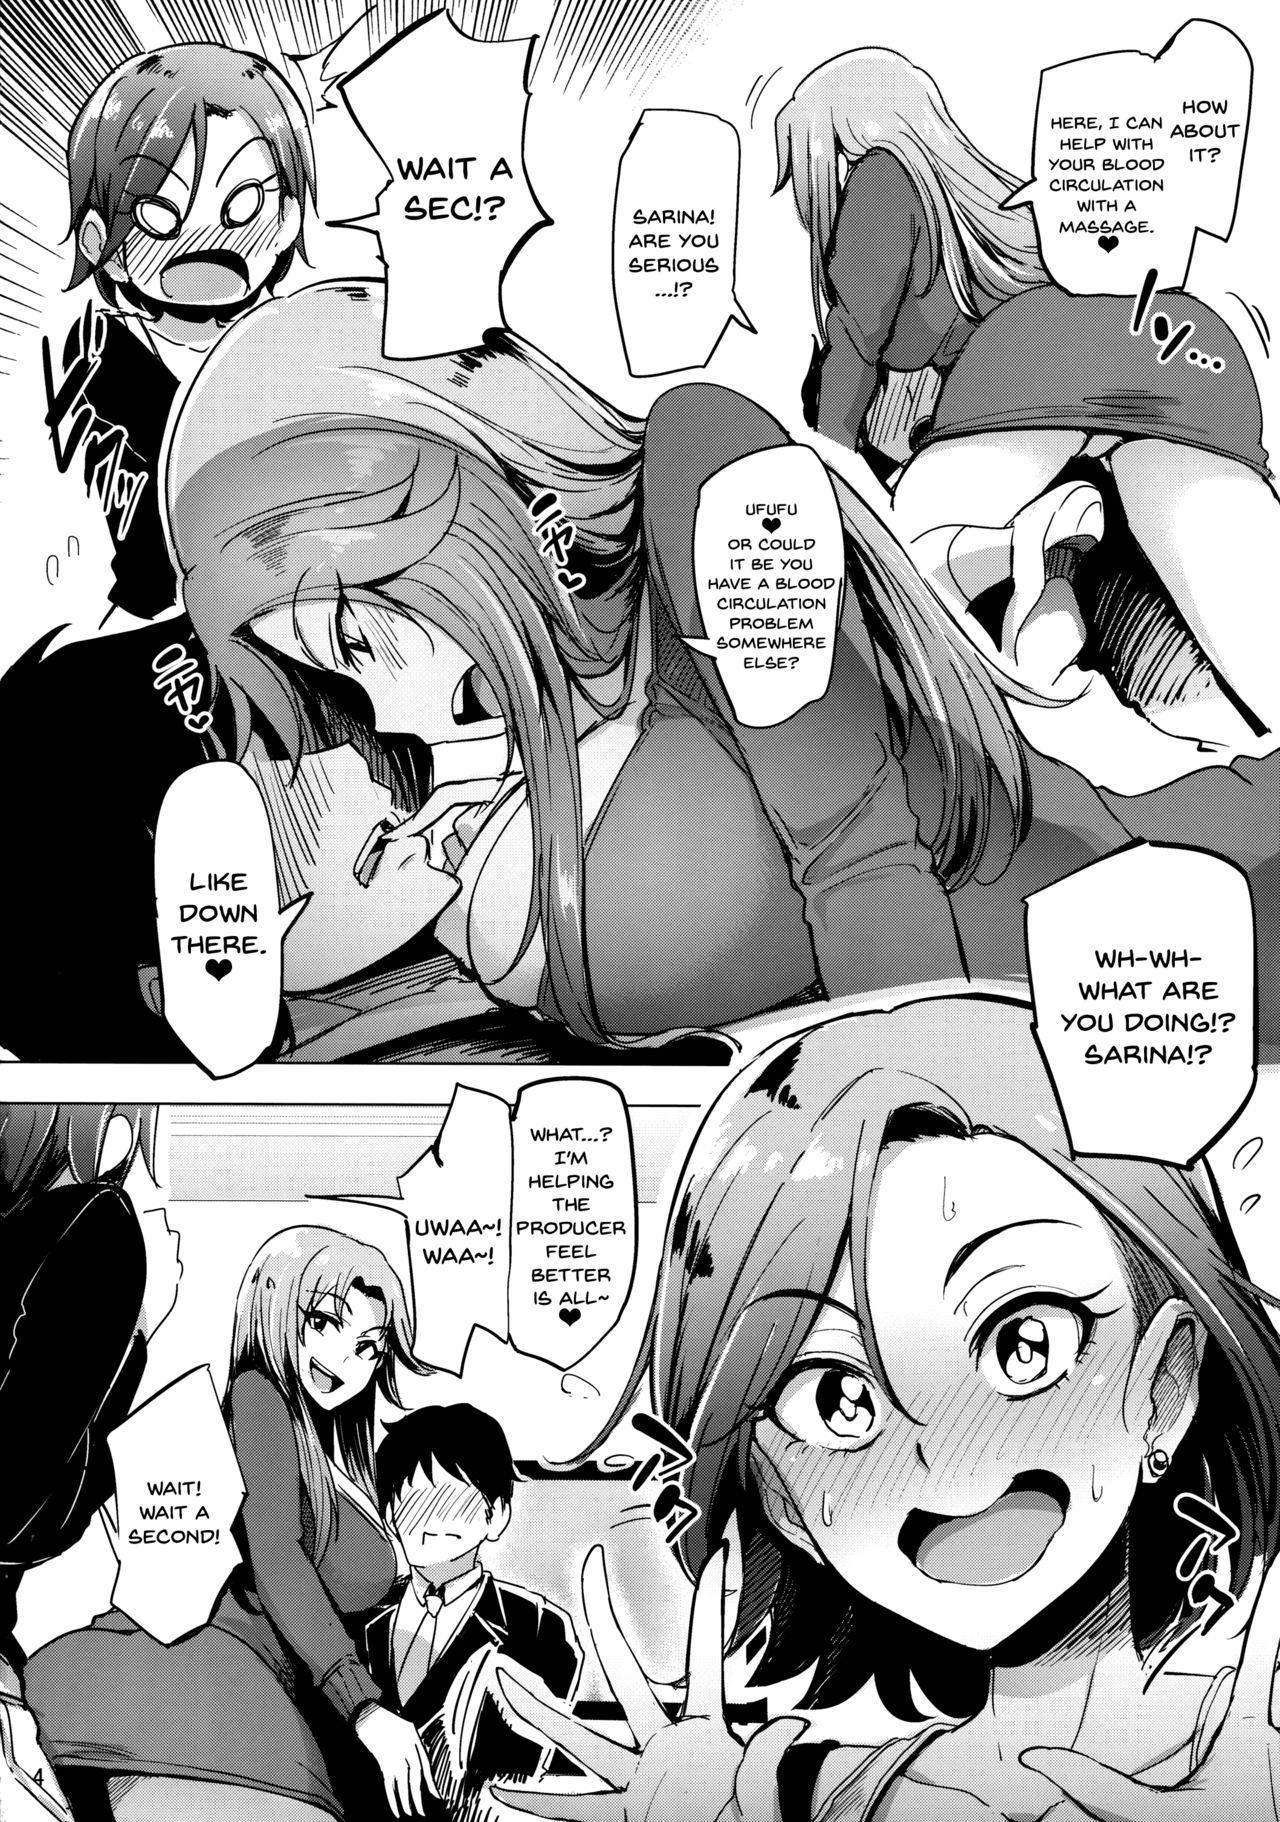 For Chouhatwin Idol - The idolmaster Vagina - Page 3